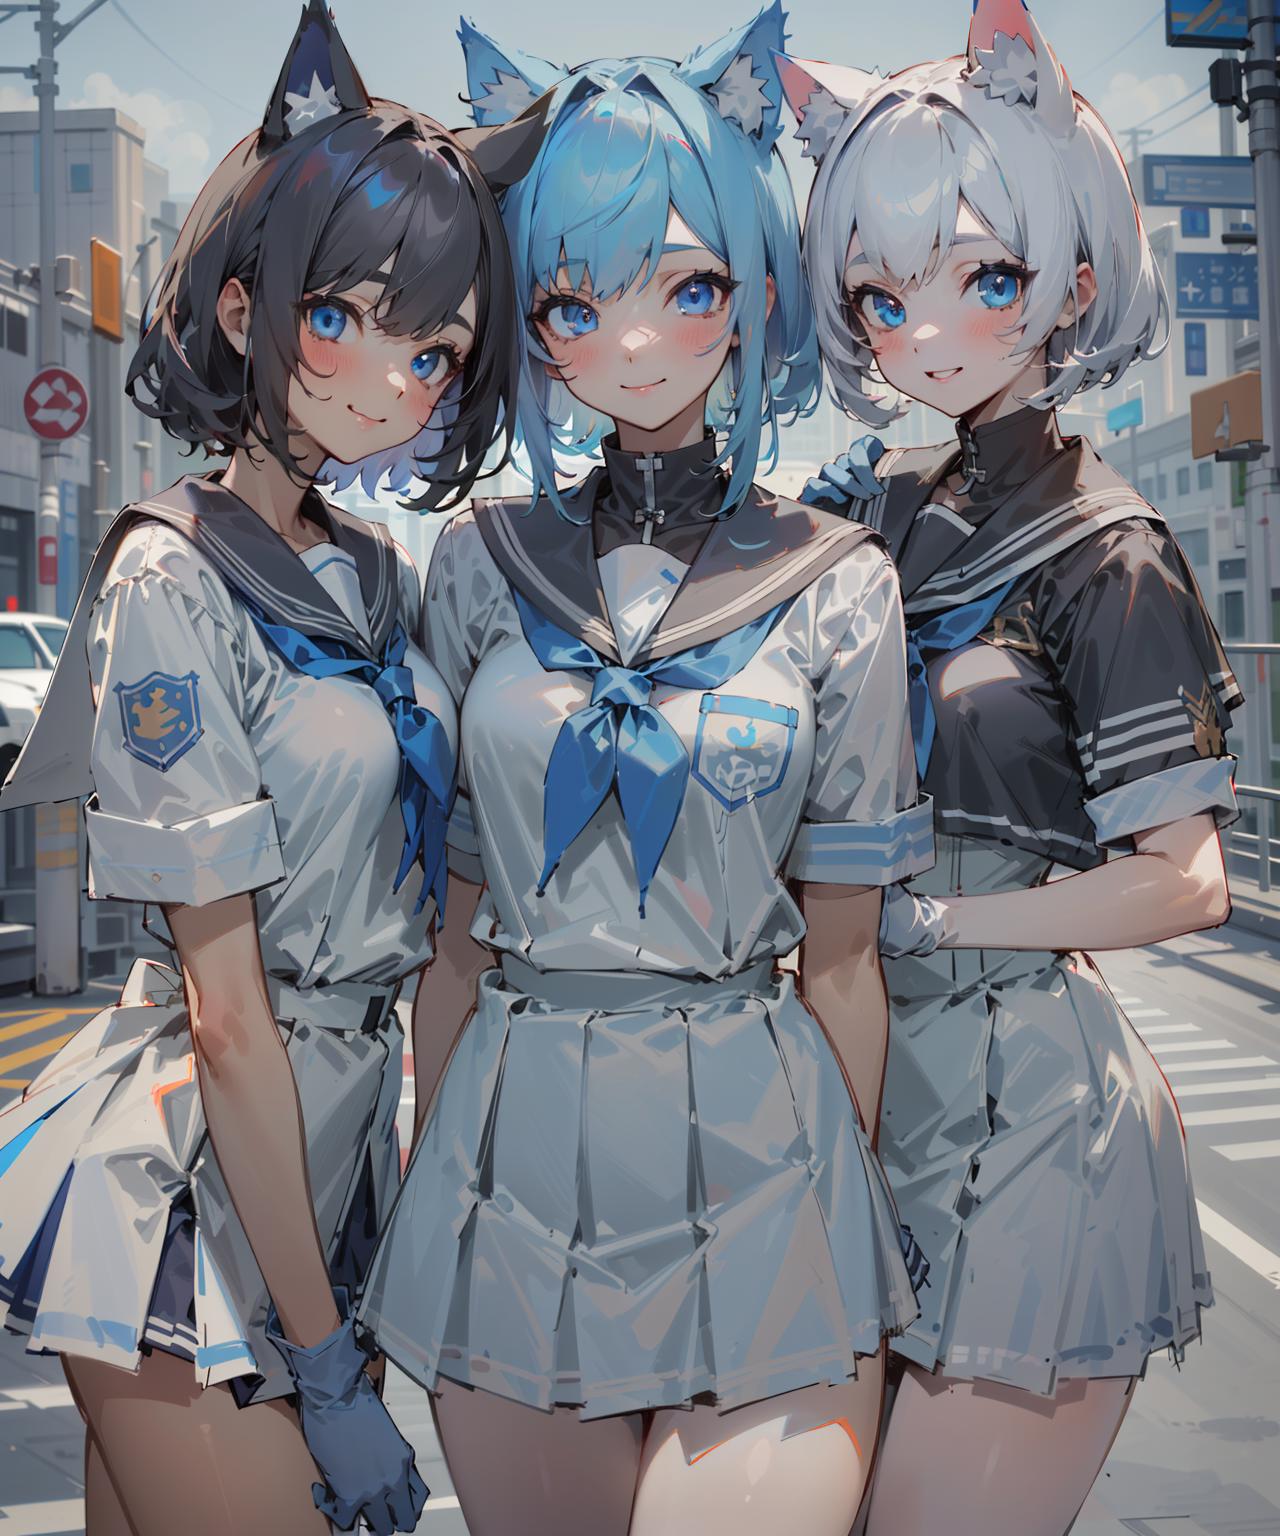 Three Anime Girls in Uniforms Standing on a Road